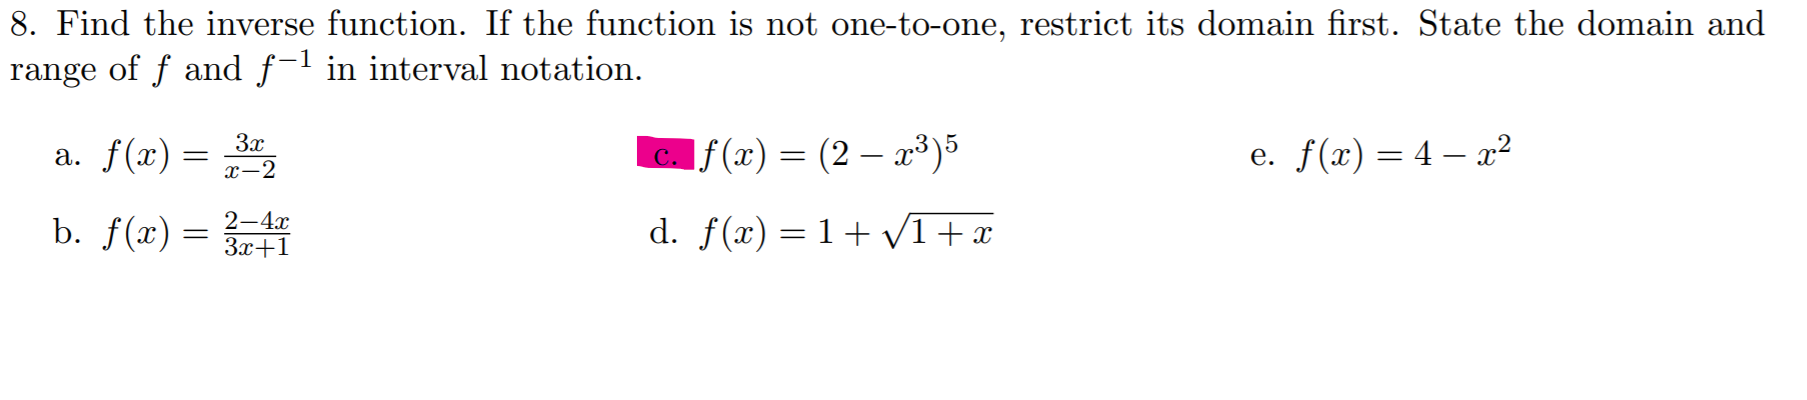 8. Find the inverse function. If the function is not one-to-one, restrict its domain first. State the domain and
range of f and f-l in interval notation.
3x
a. f(x) =
c. f(x) = (2 – x³)5
e. f(x) = 4 – x²
х-2
d. f(x) = 1+ V1 +x
2—4х
b. f(x) =
3x+1
